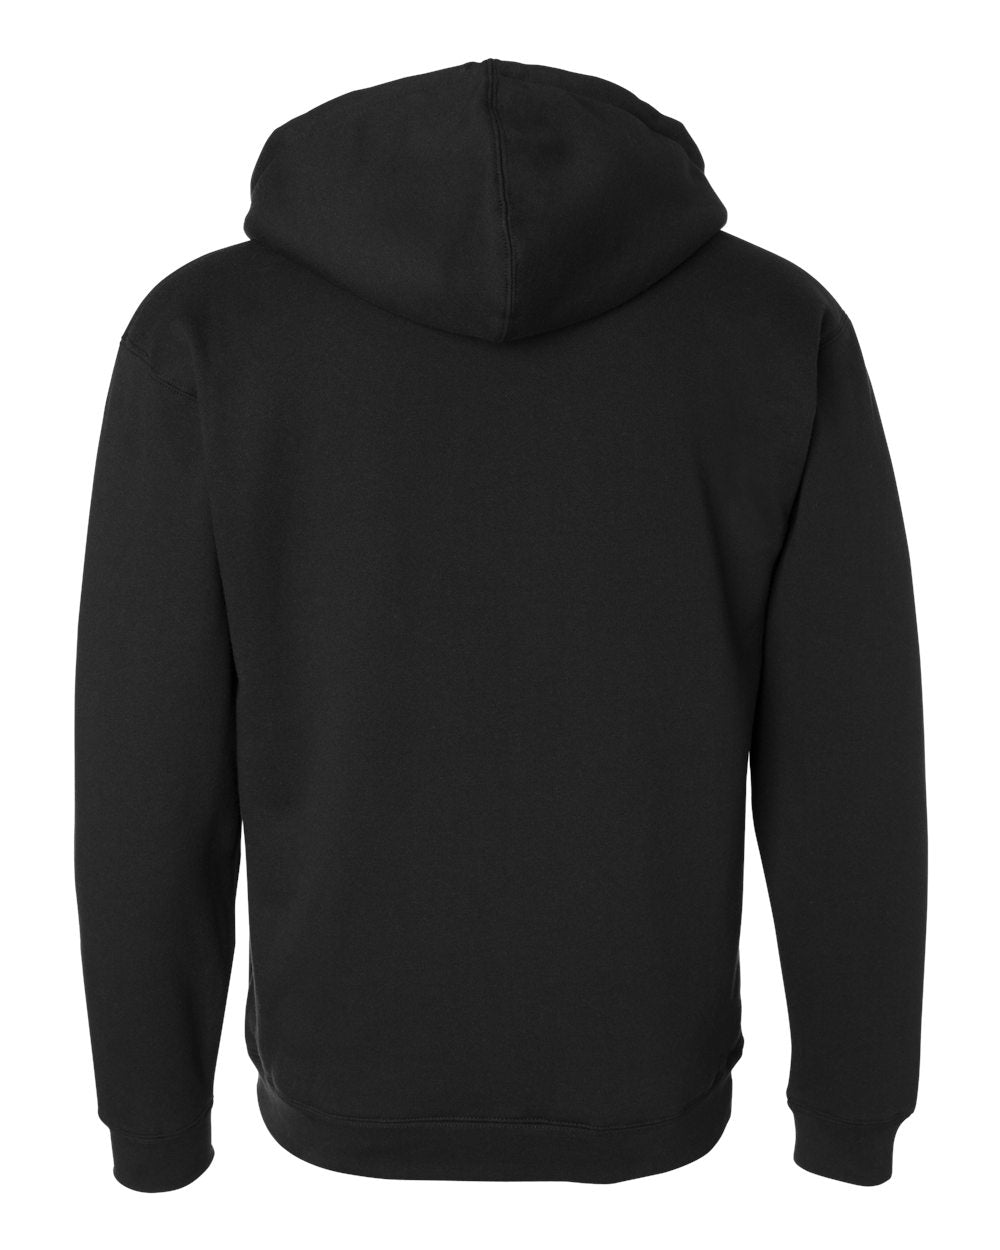 Independent Trading Co. - Sherpa-Lined Full-Zip Hooded Sweatshirt